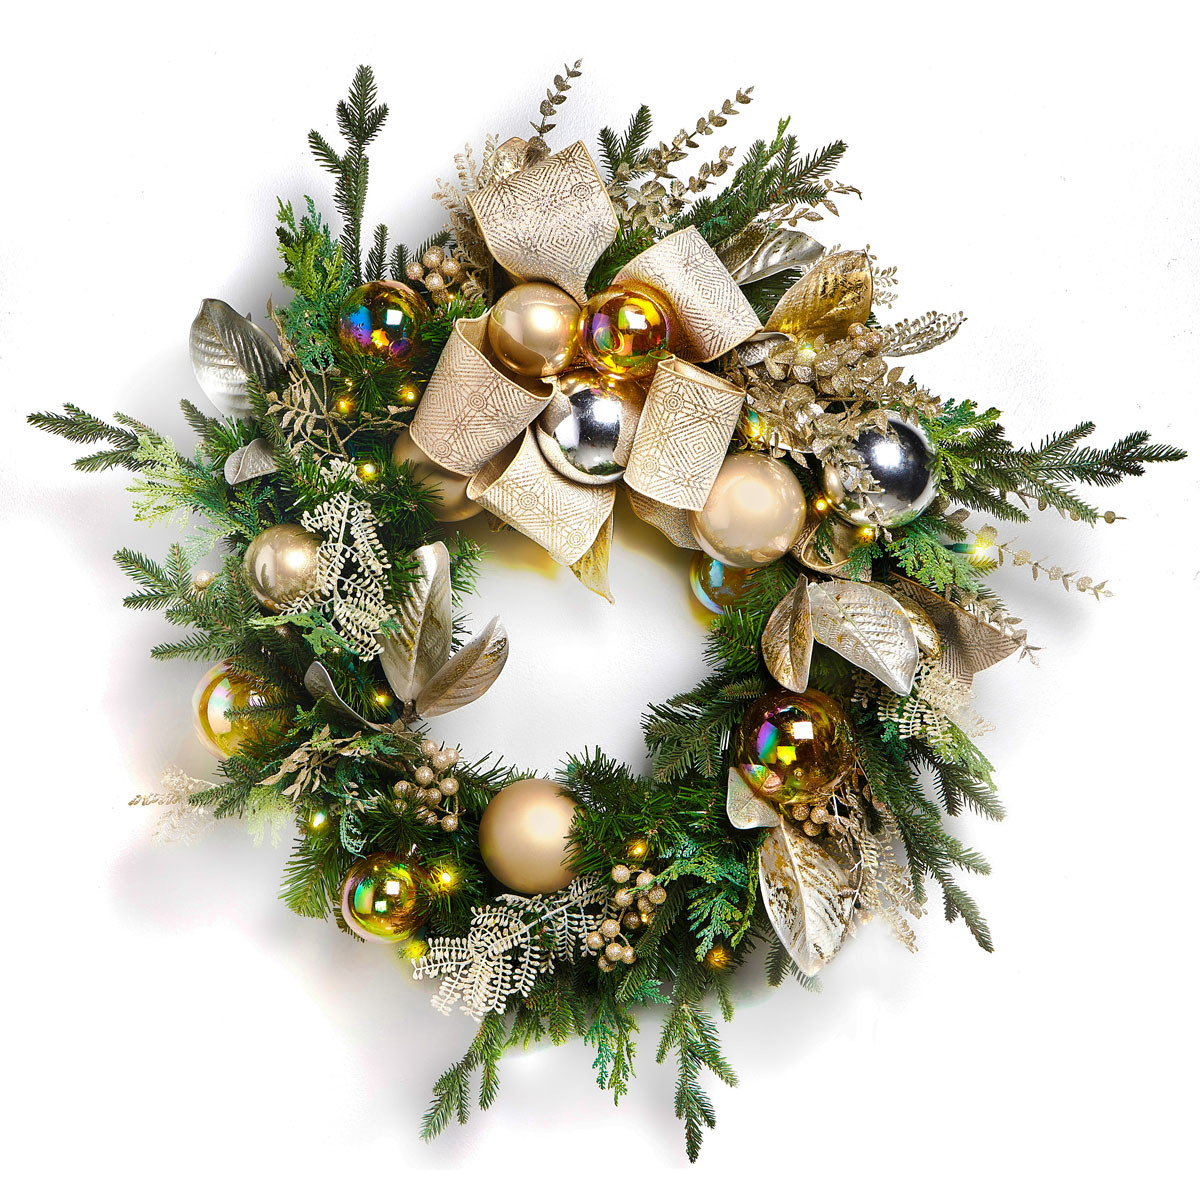 Wreath 36" Pre-Decorated Metallic Gold, Champagne and Silver w/LED Minis - Case of 2